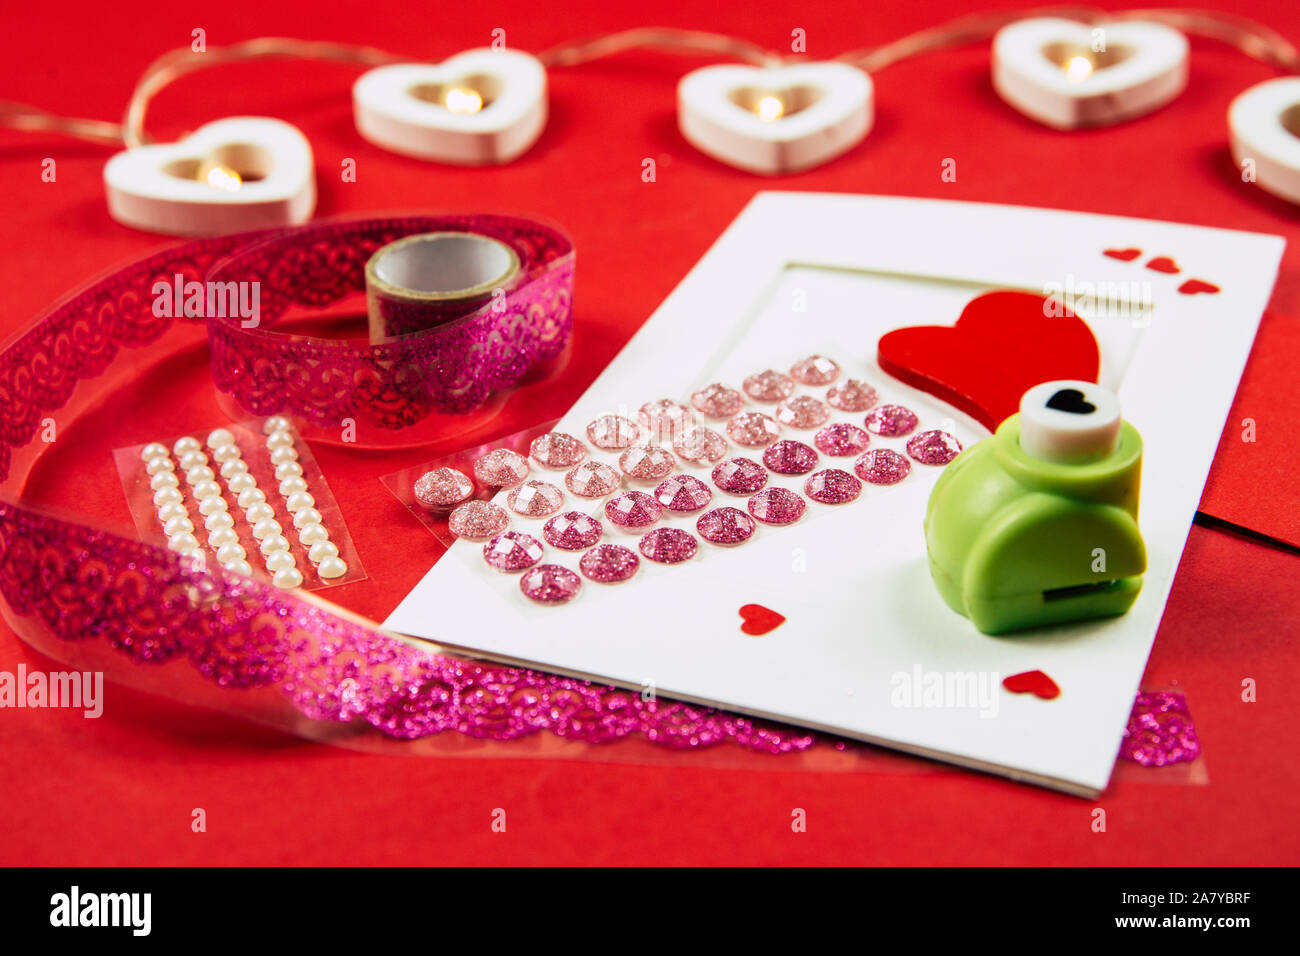 Making Greetings card concept. Various arts and crafts tools on table, red background. Stock Photo